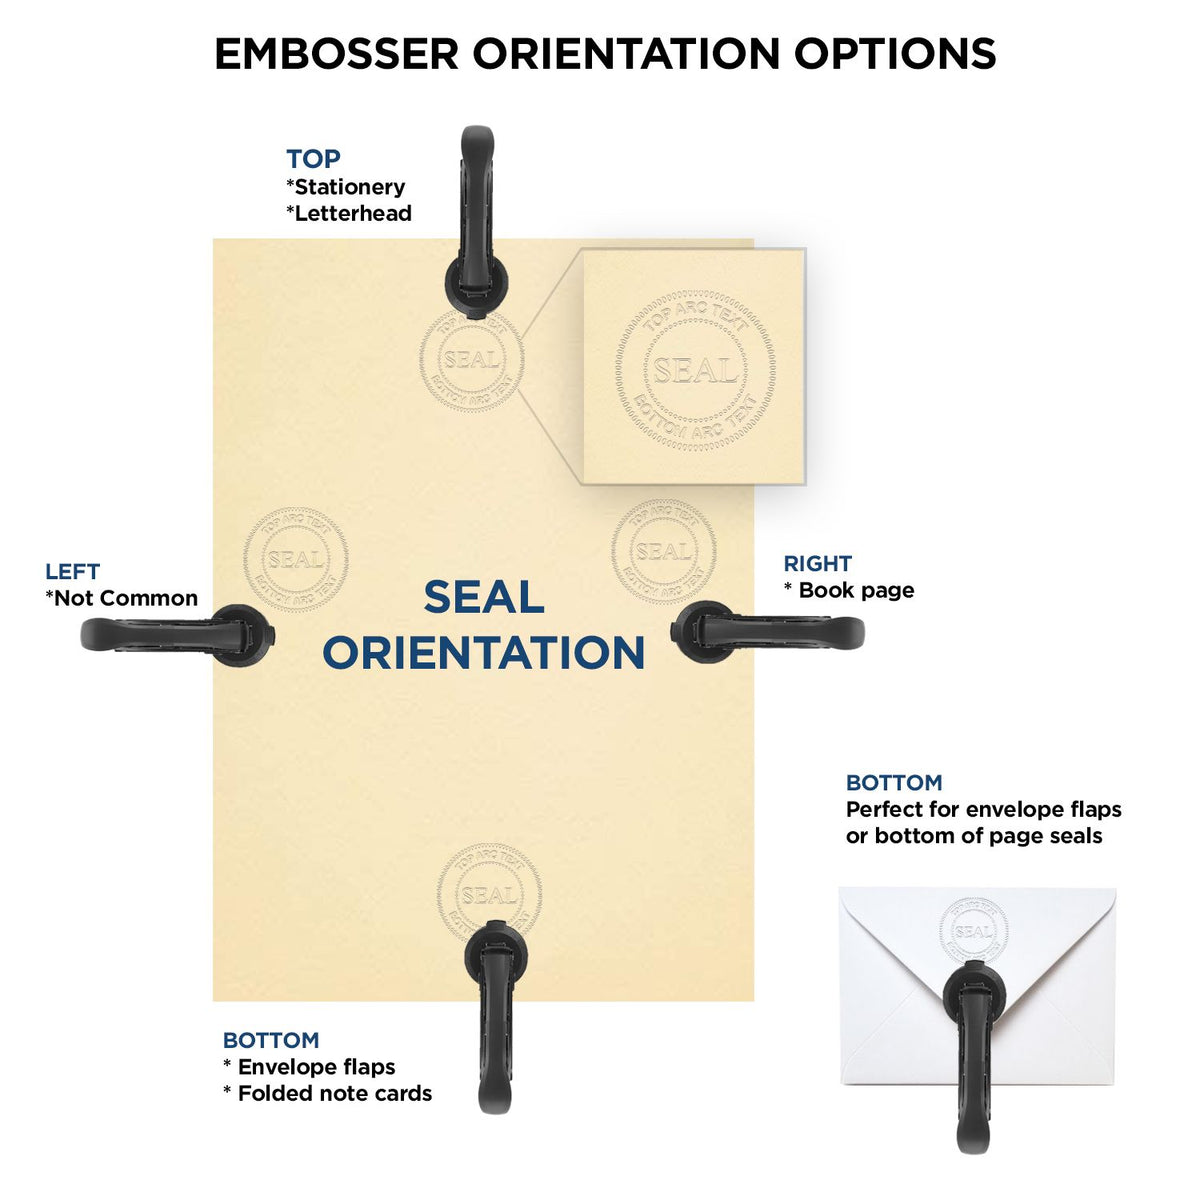 An infographic for the Heavy Duty Cast Iron Montana Geologist Seal Embosser showing embosser orientation, this is showing examples of a top, bottom, right and left insert.